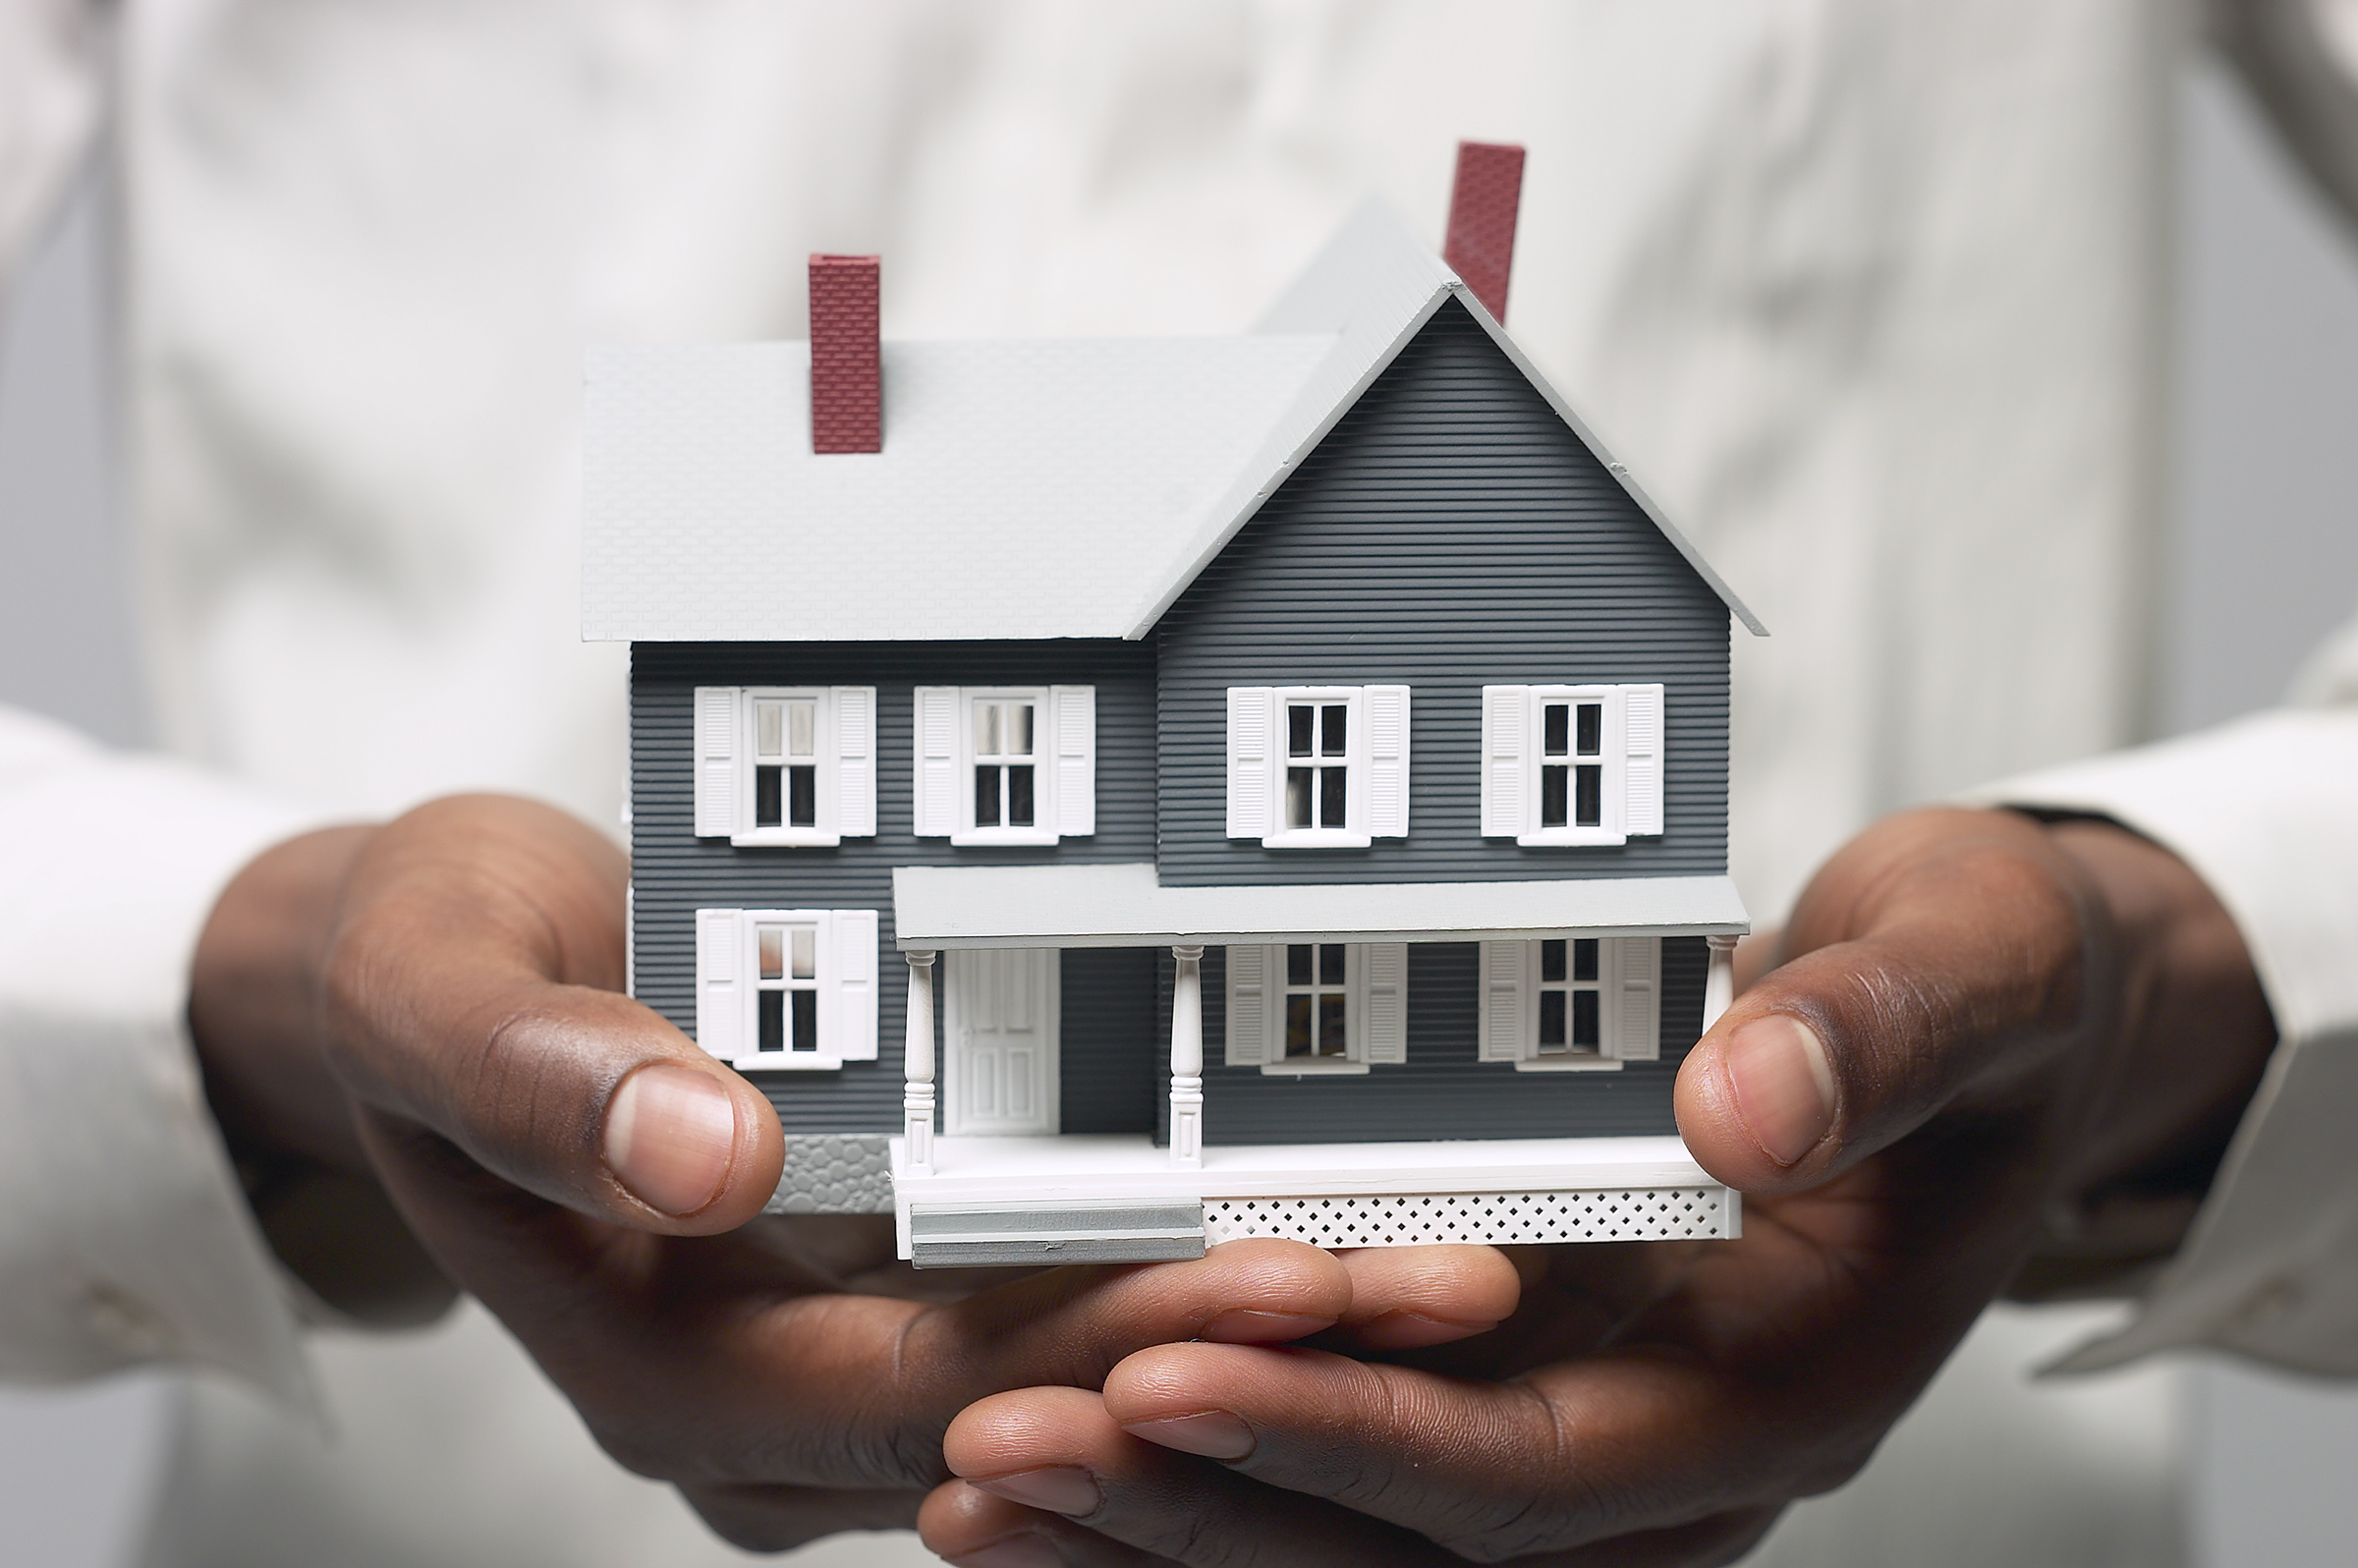 How to Cut the Cost of Home Insurance